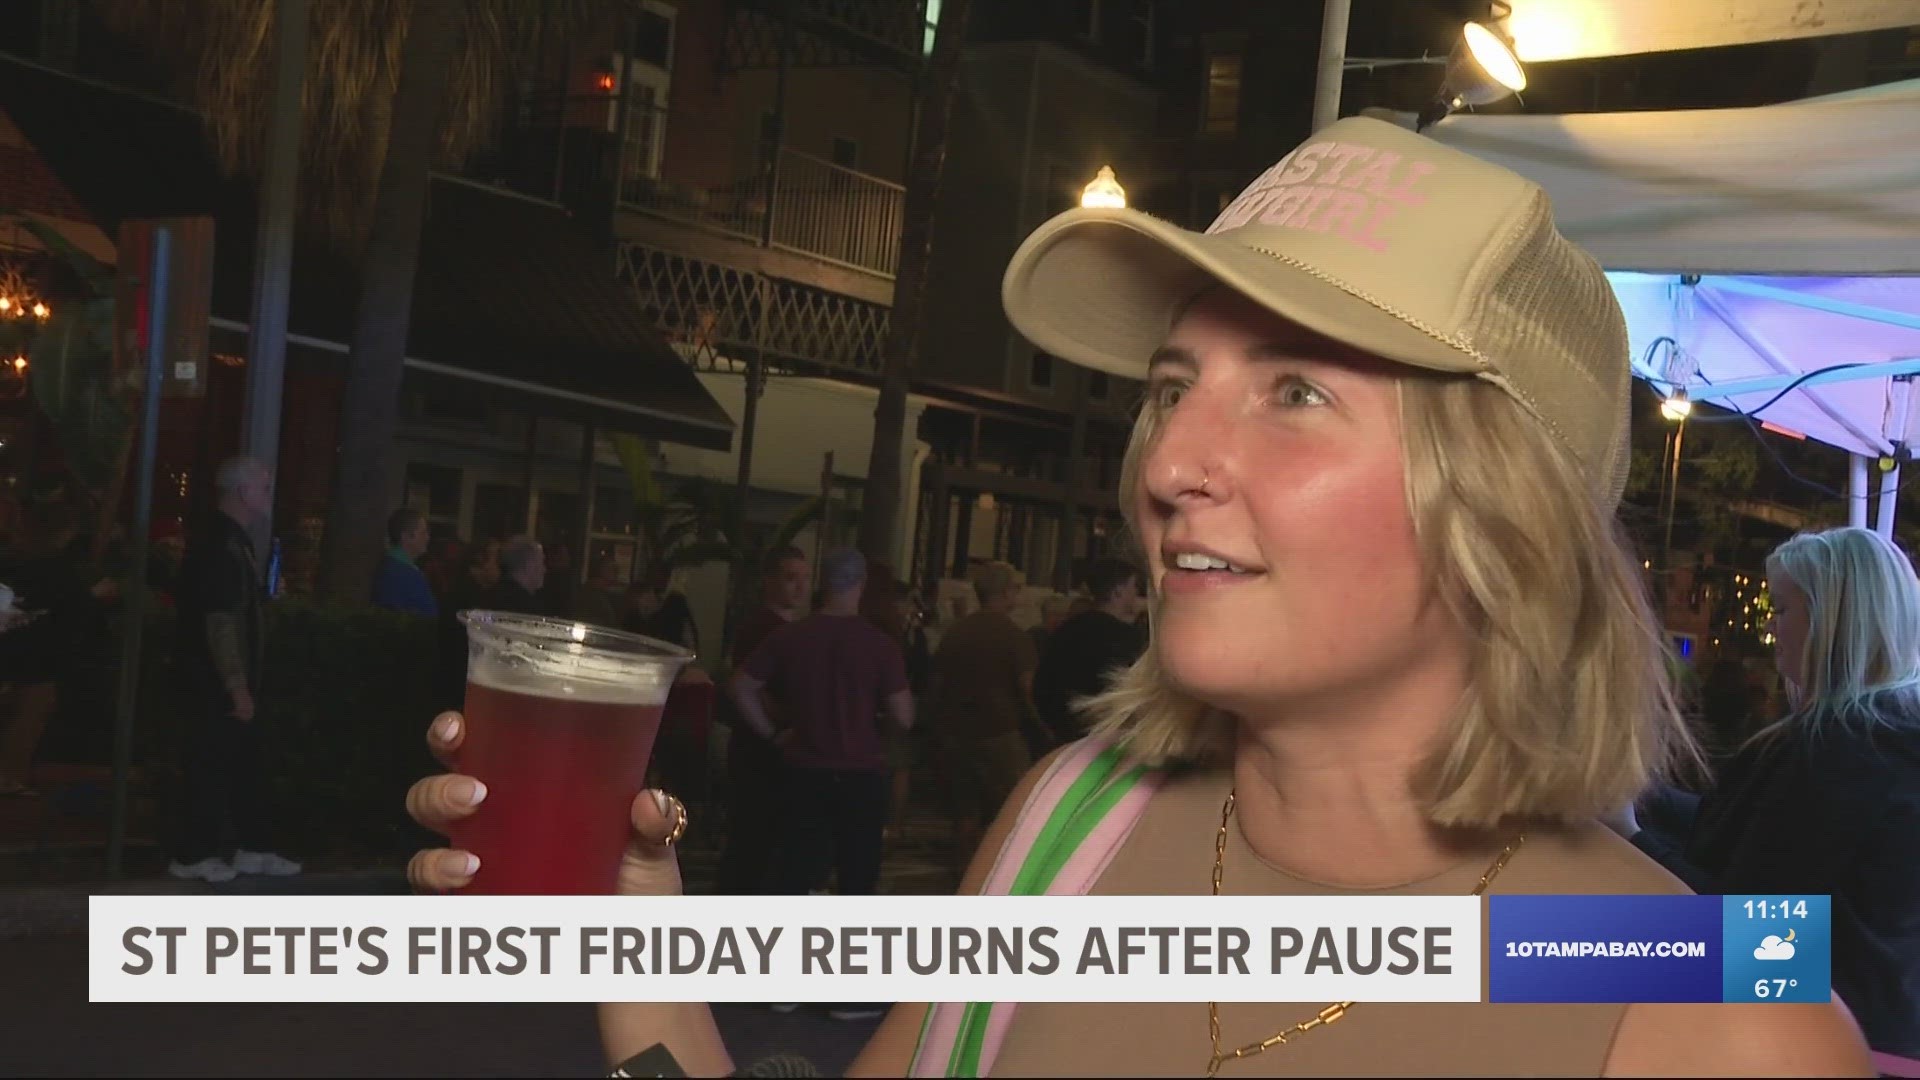 The return of First Friday ran from 6-10 p.m. on Jan. 5 on Central Avenue between 2nd and 3rd streets.